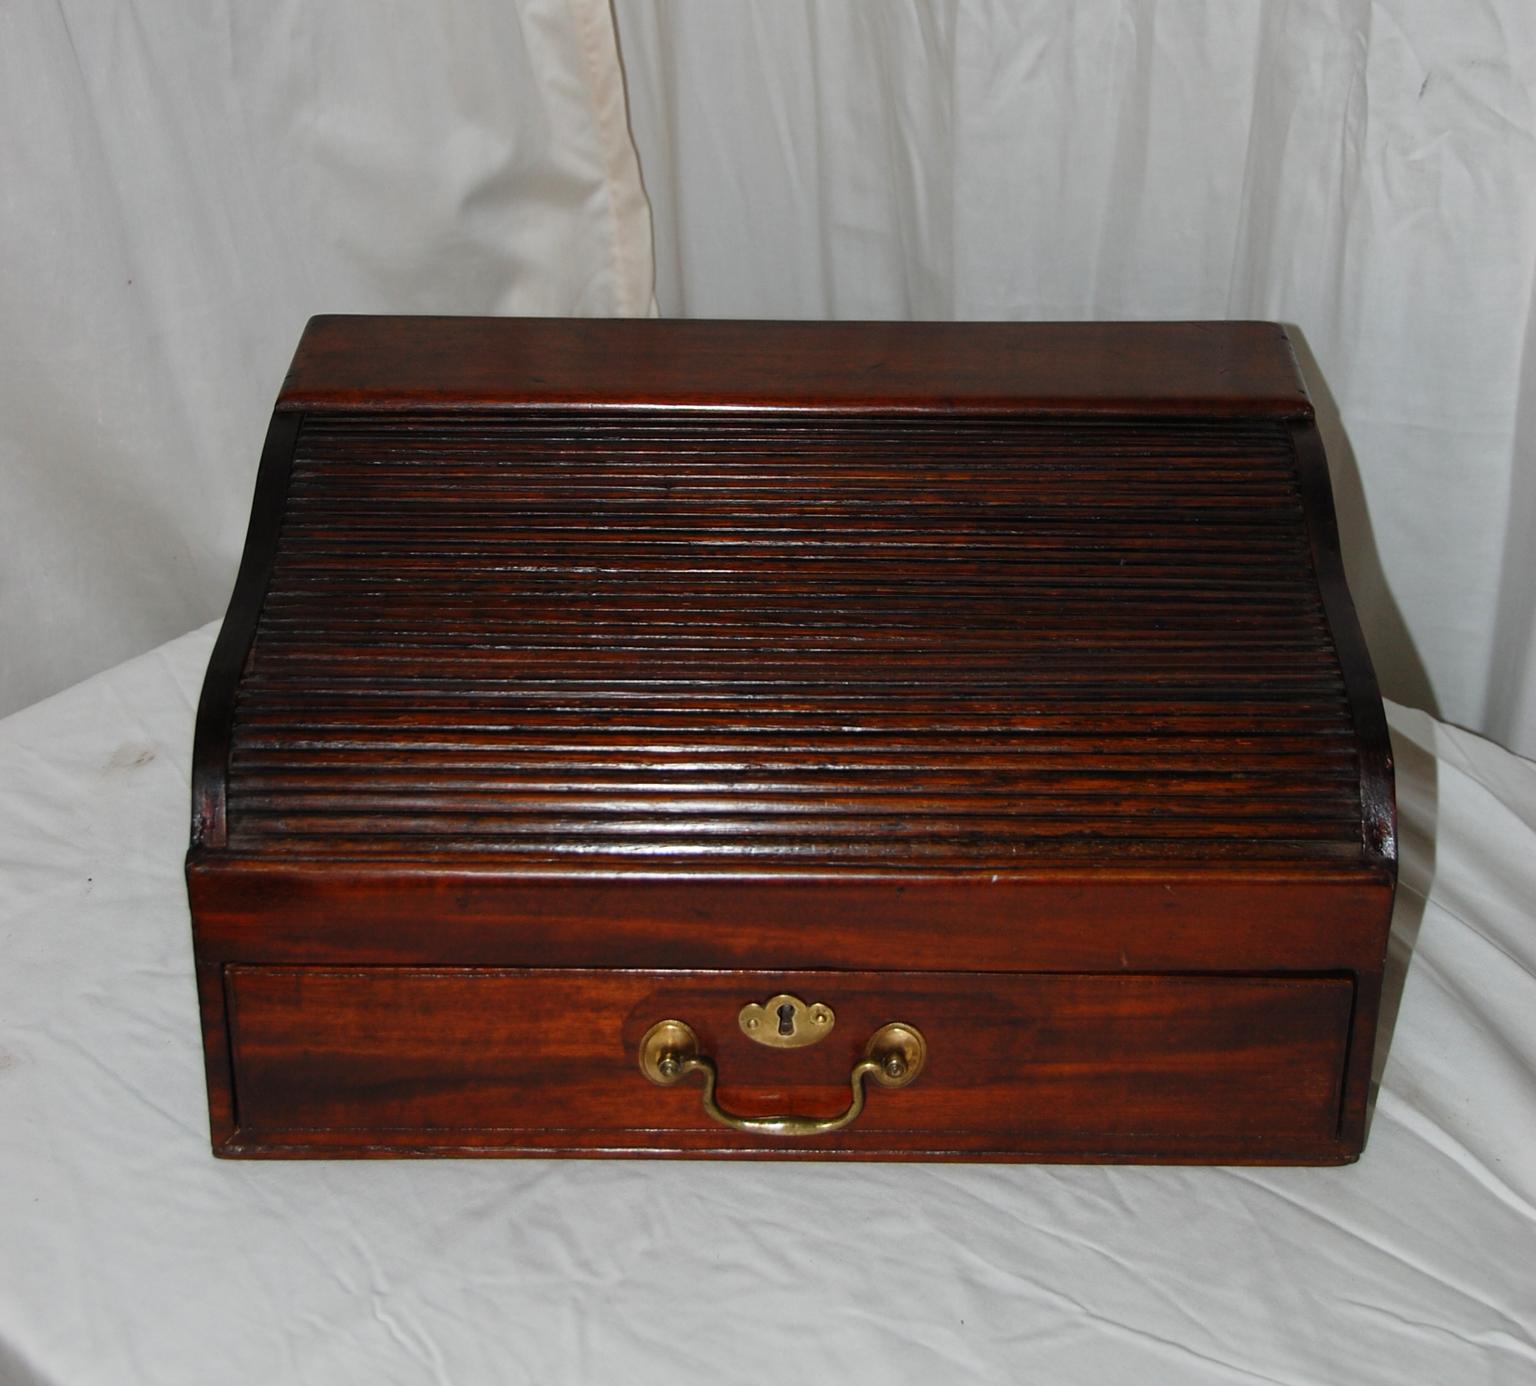 English William IV mahogany tambour writing box with drawer.  The tambour top is serpentine in shape, rolls back and reveals a place for writing utensils and ink (a removable open narrow box is ideal for pens or ink bottles).  There is a separate